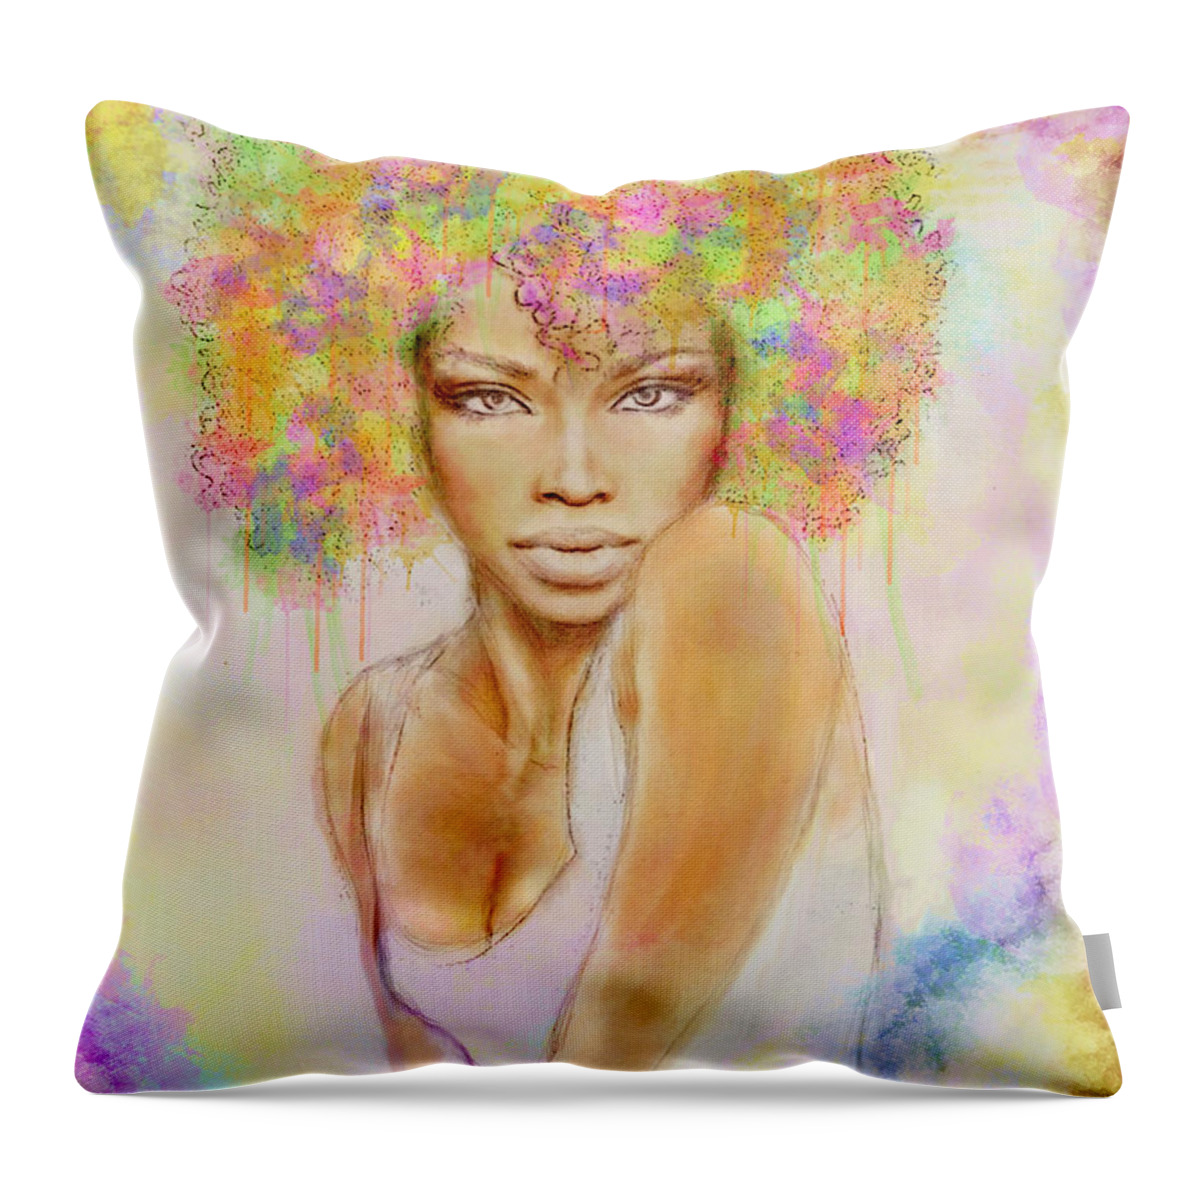 Girl Throw Pillow featuring the painting Girl with new hair style by Lilia D